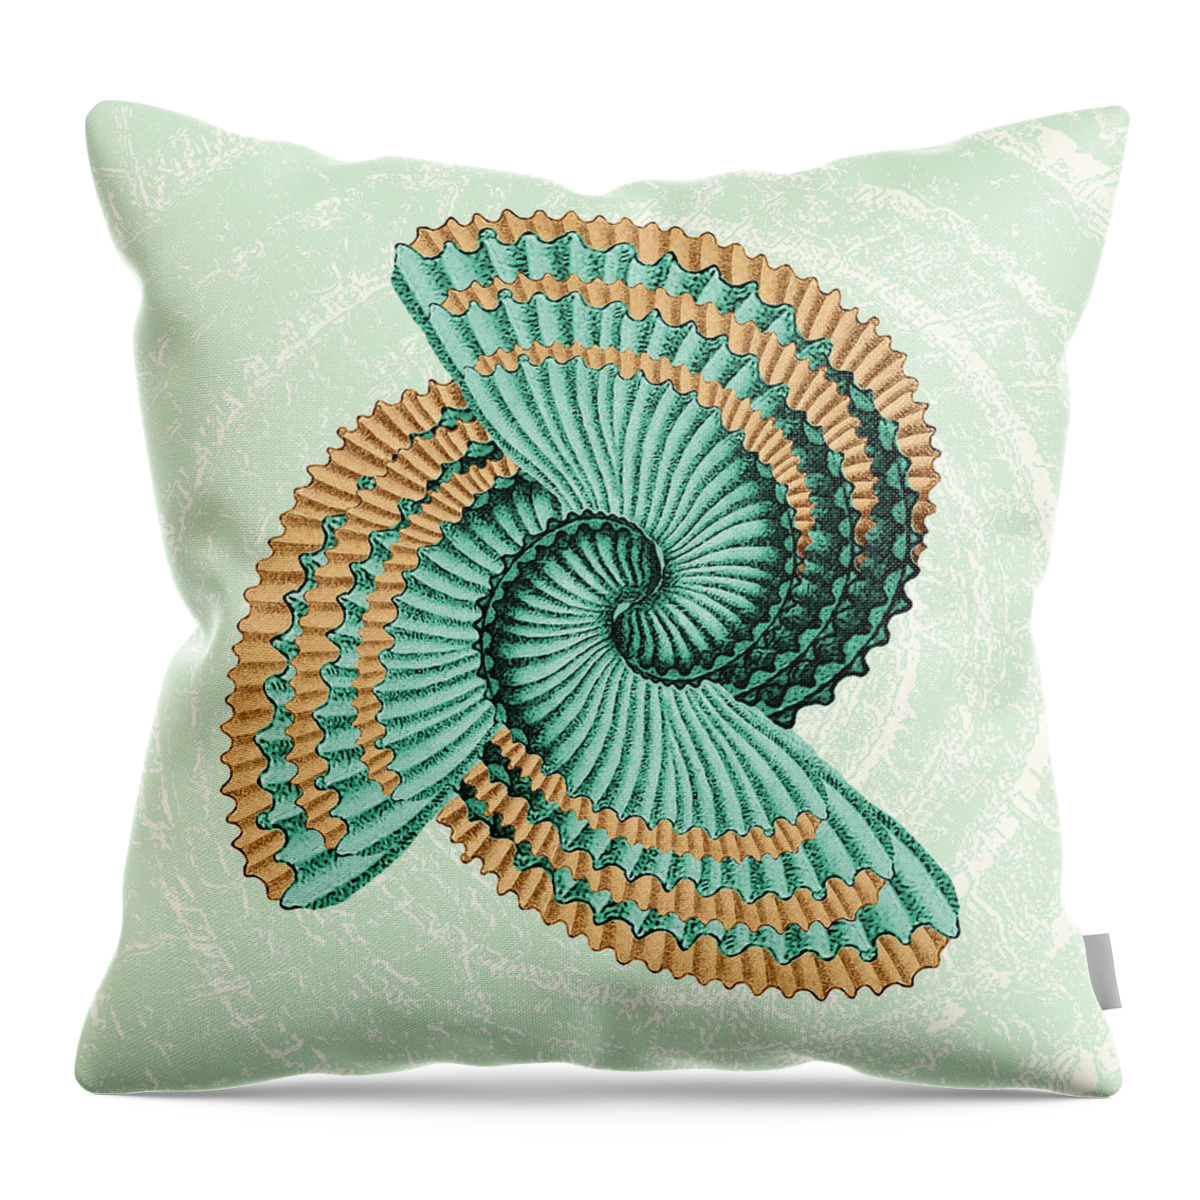 Nature Throw Pillow featuring the digital art Octopus Shell Abstract by Deborah Smith